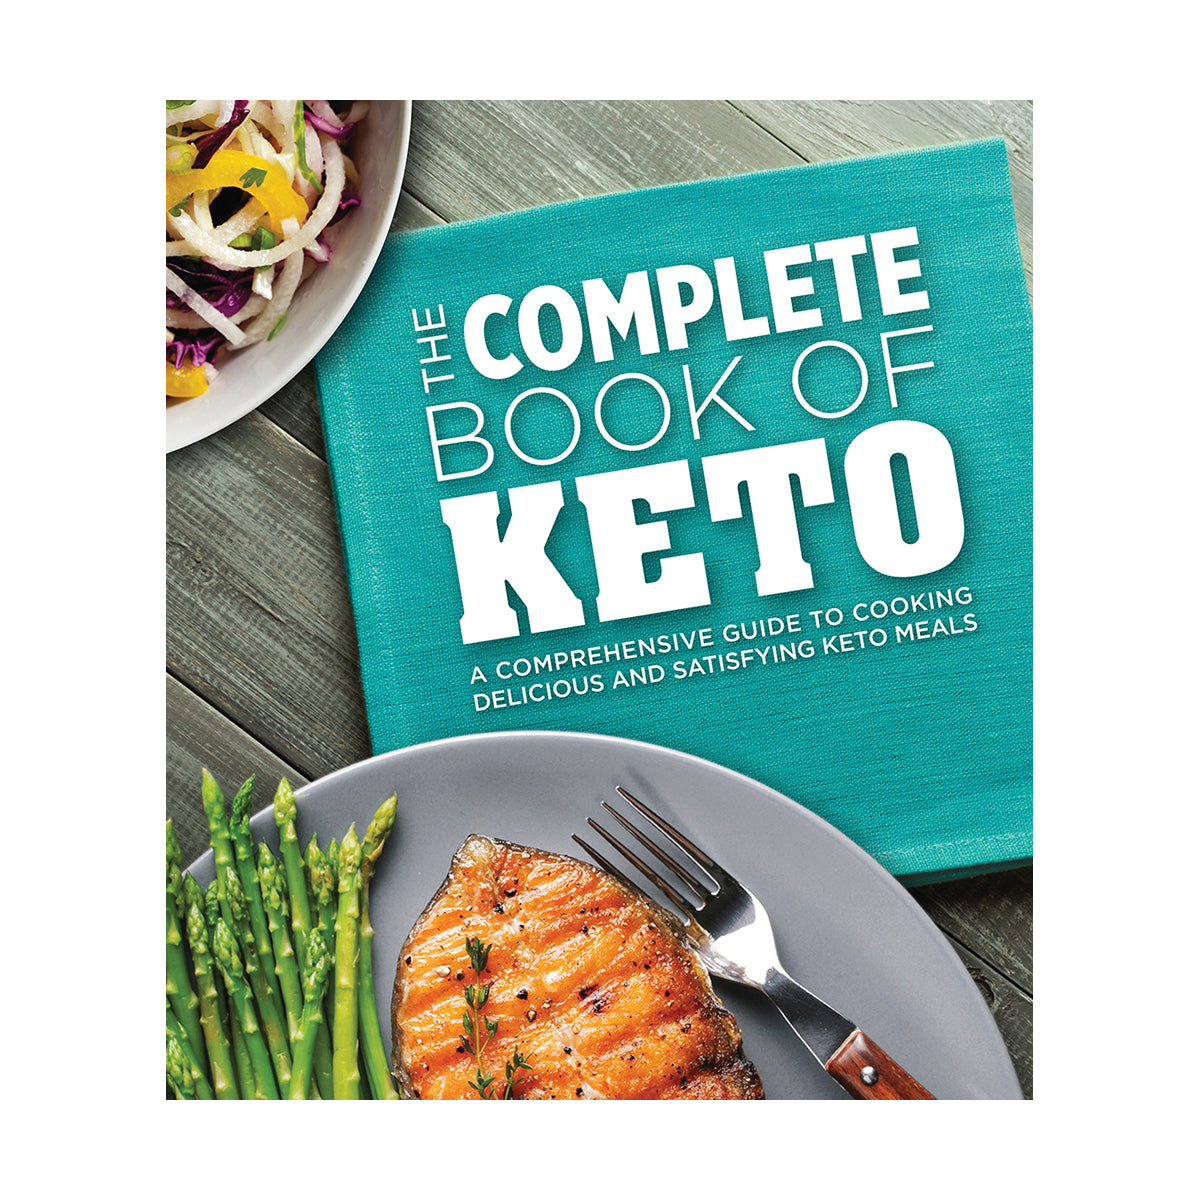 The Complete Book of Keto